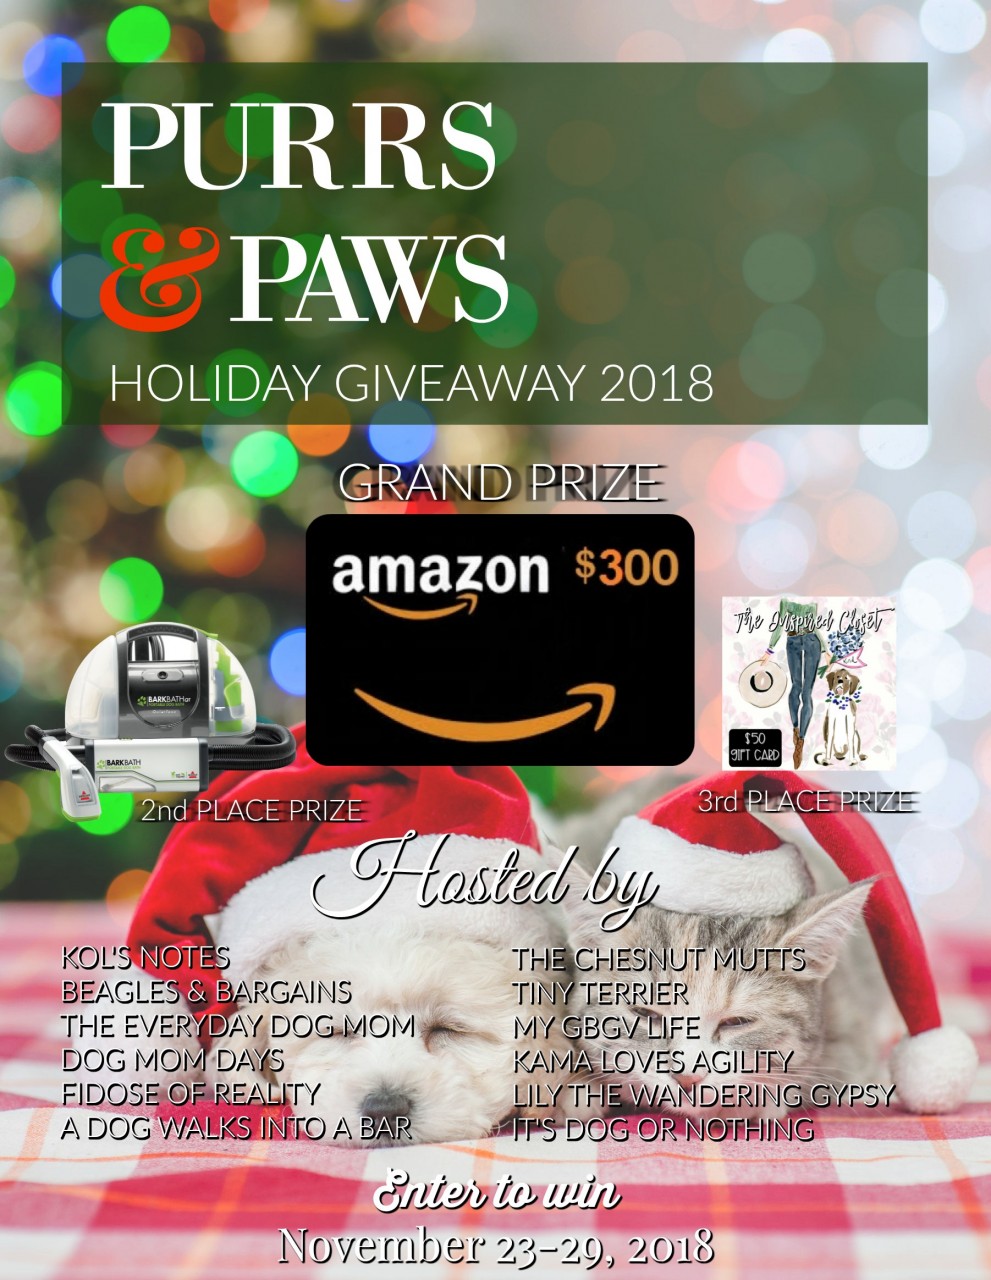 It's that time of year! Enter to win $500 in prizes in the Purrs & Paws Holiday giveaway on It's Dog or Nothing!